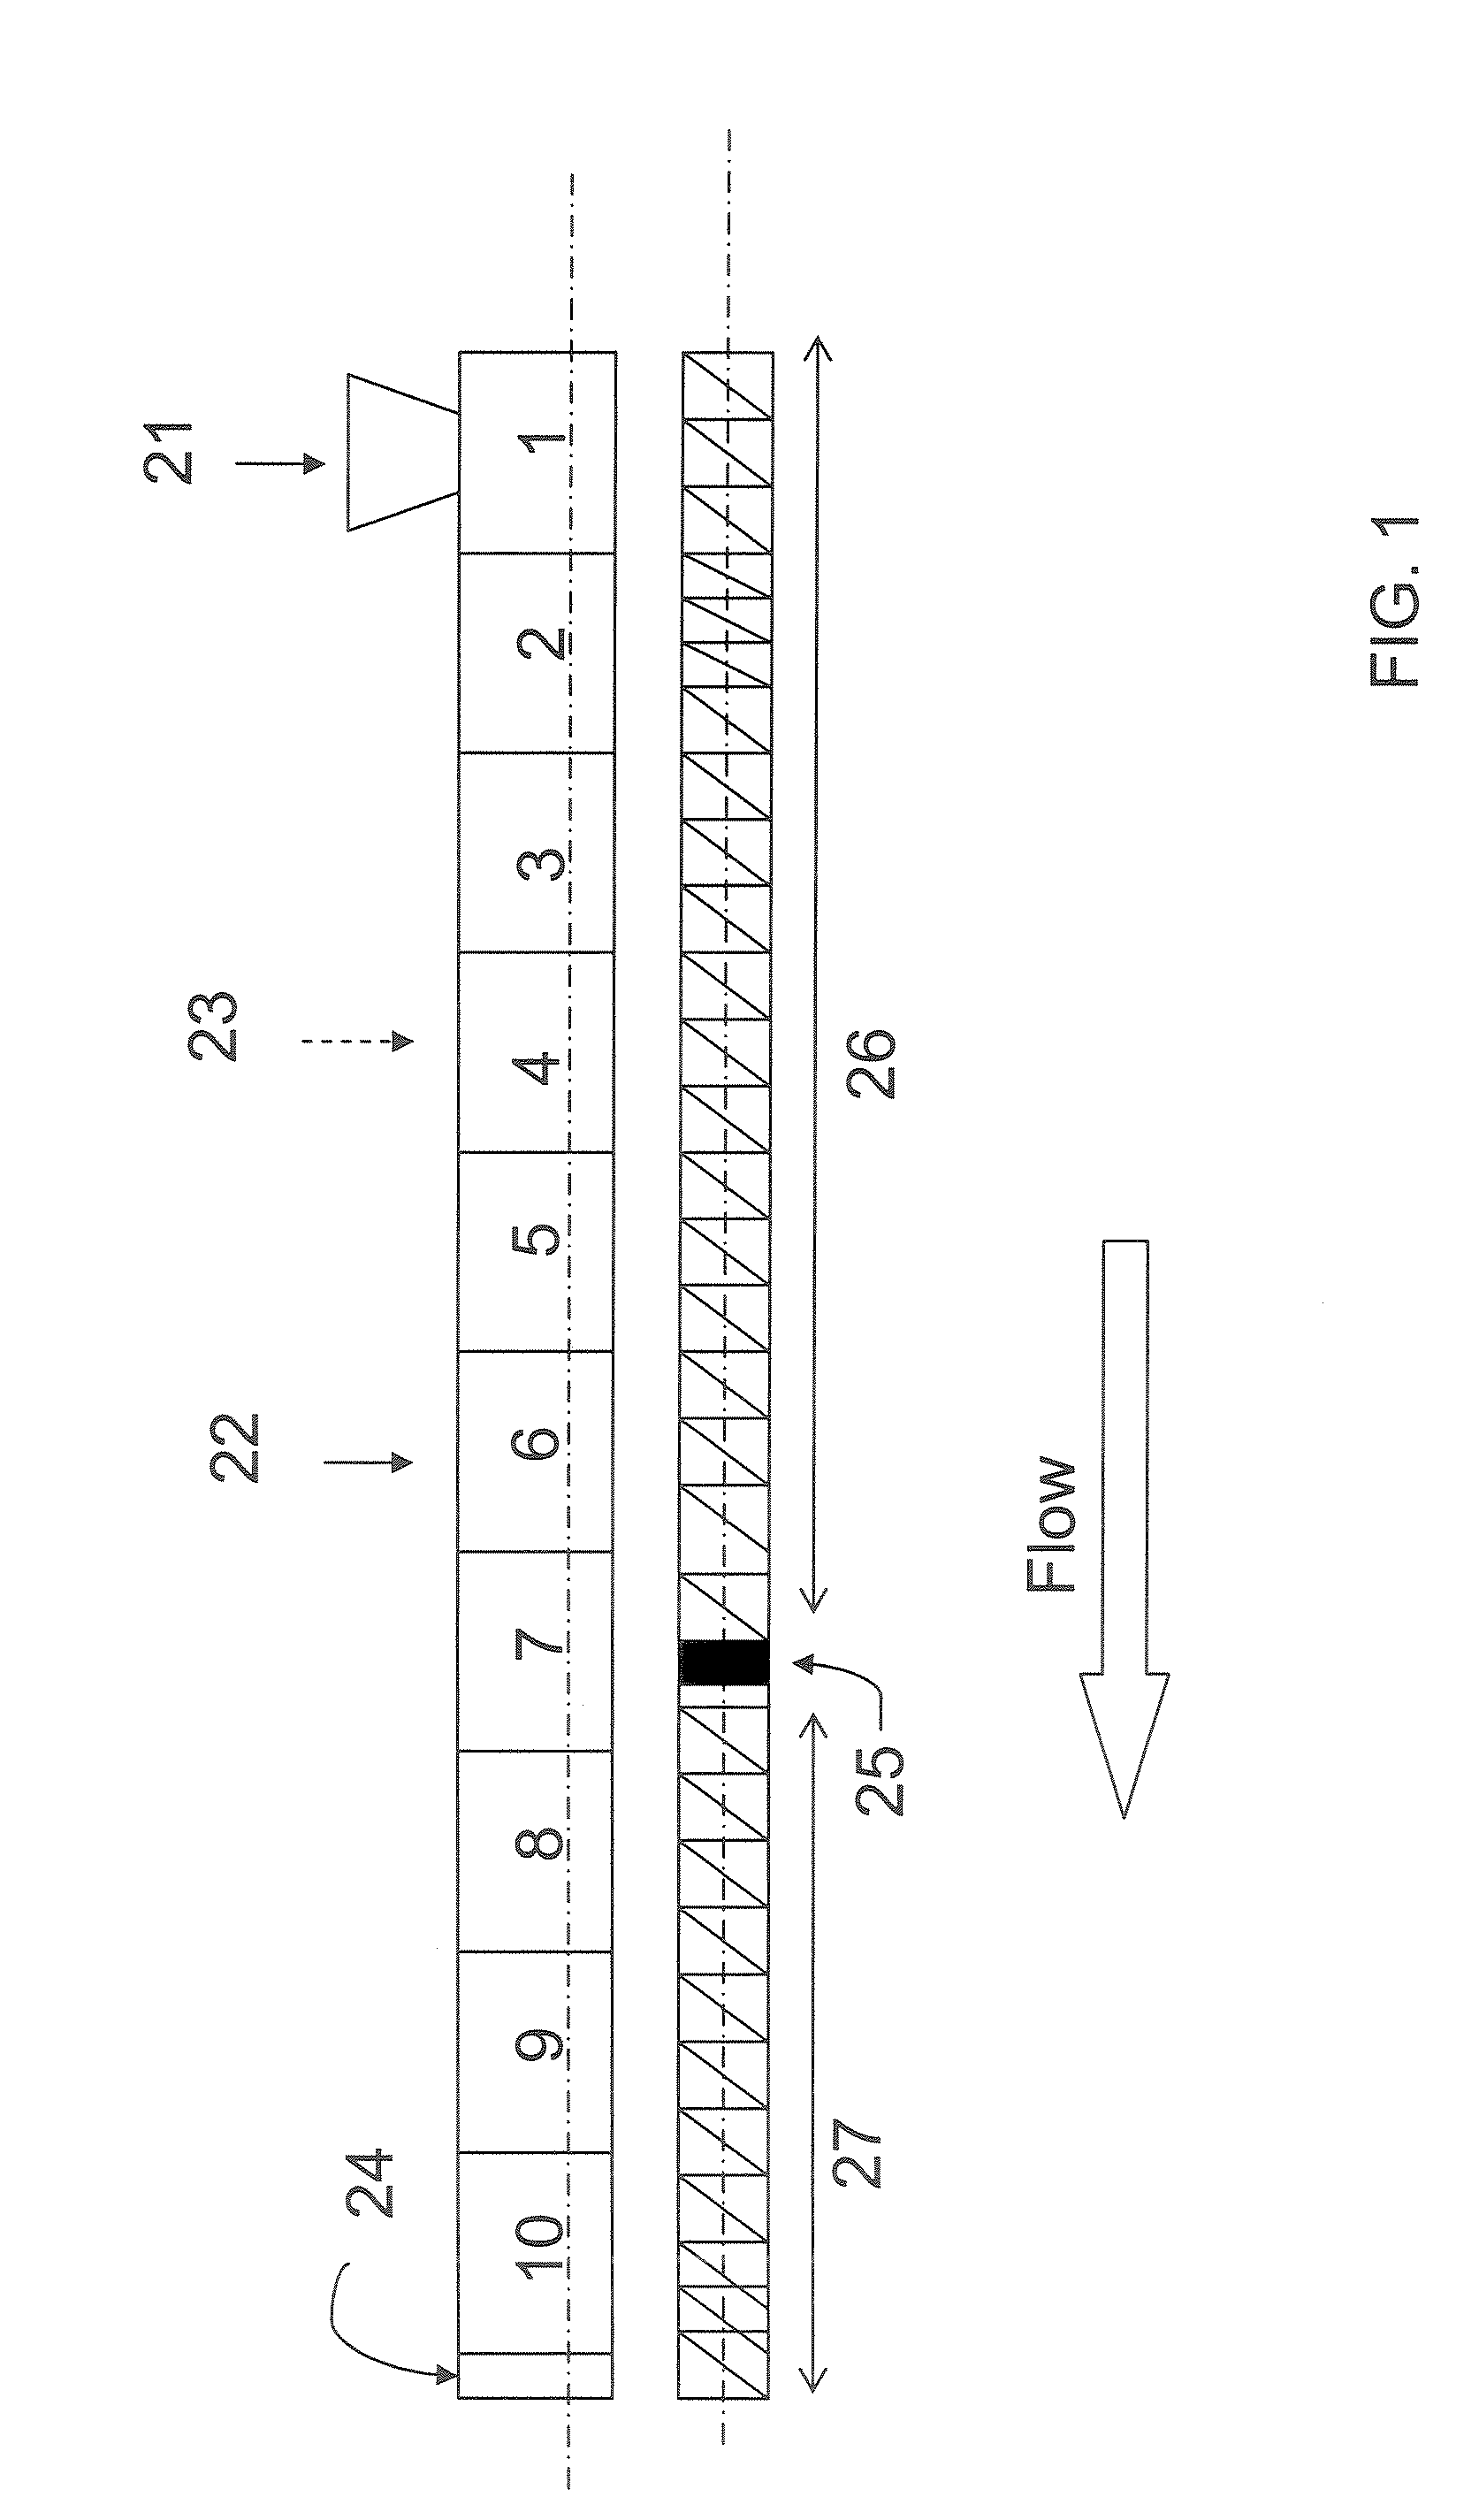 Process for manufacturing a delivery system for active components as part of an edible compostion